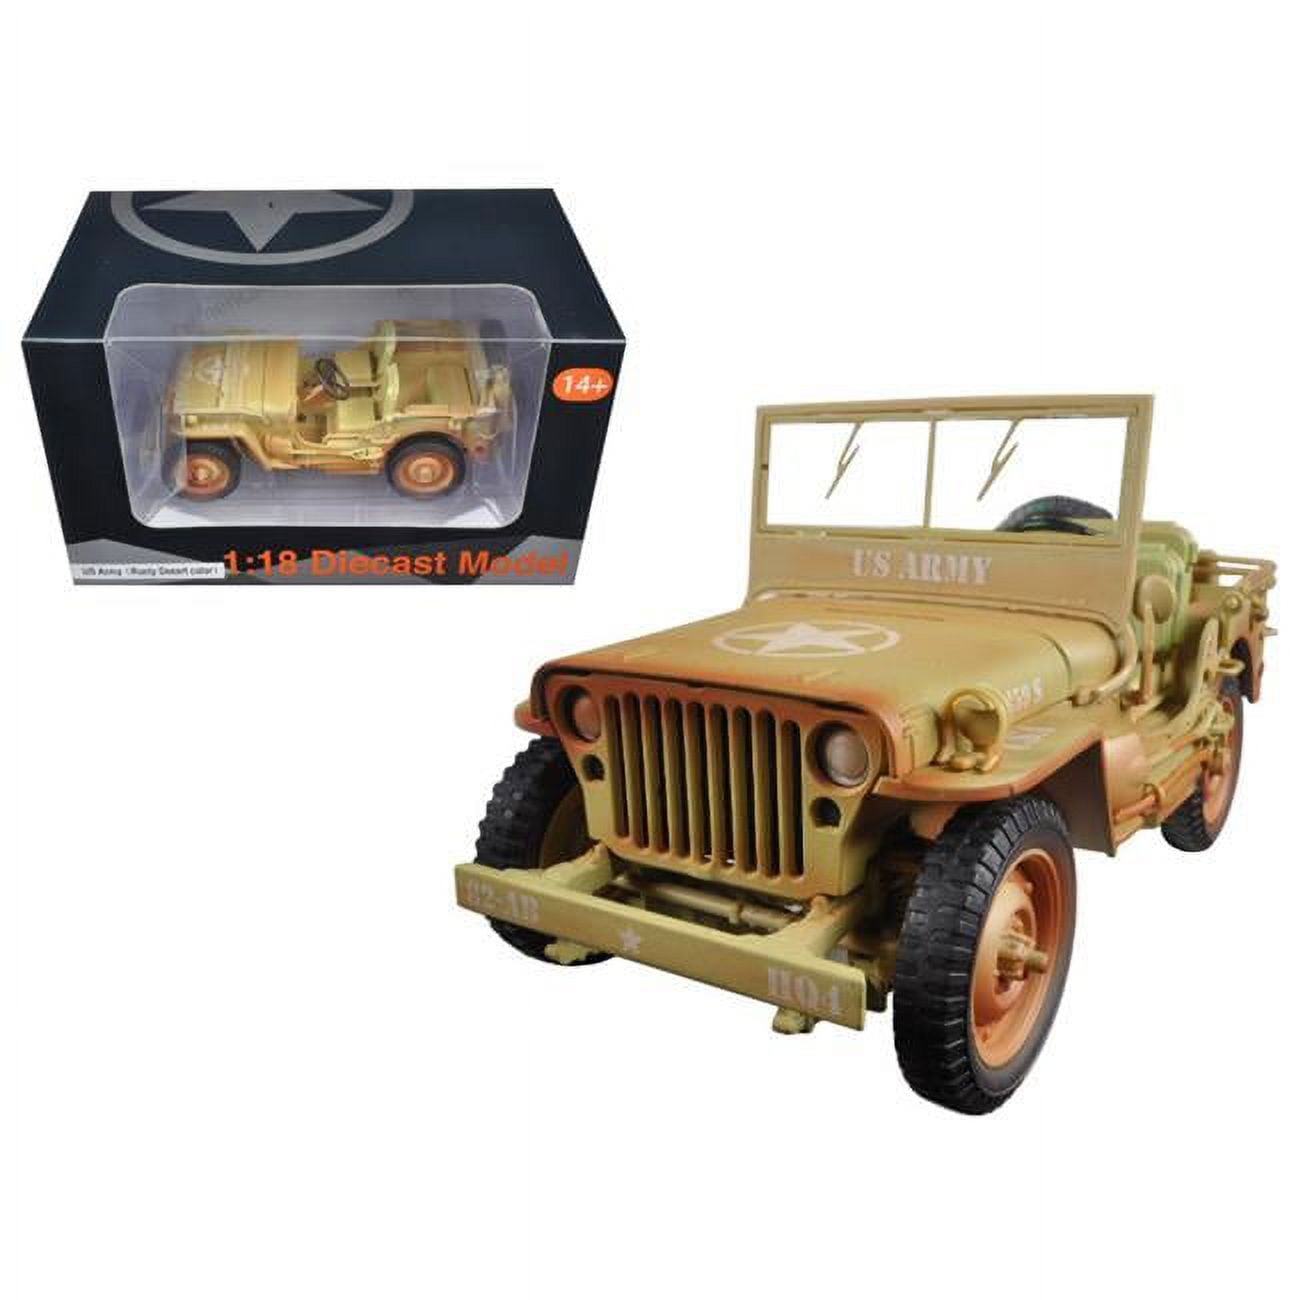 77408a 1 By 18 Scale Diecast Us Army Wwii Jeep Vehicle Desert Color Weathered Version Model Car